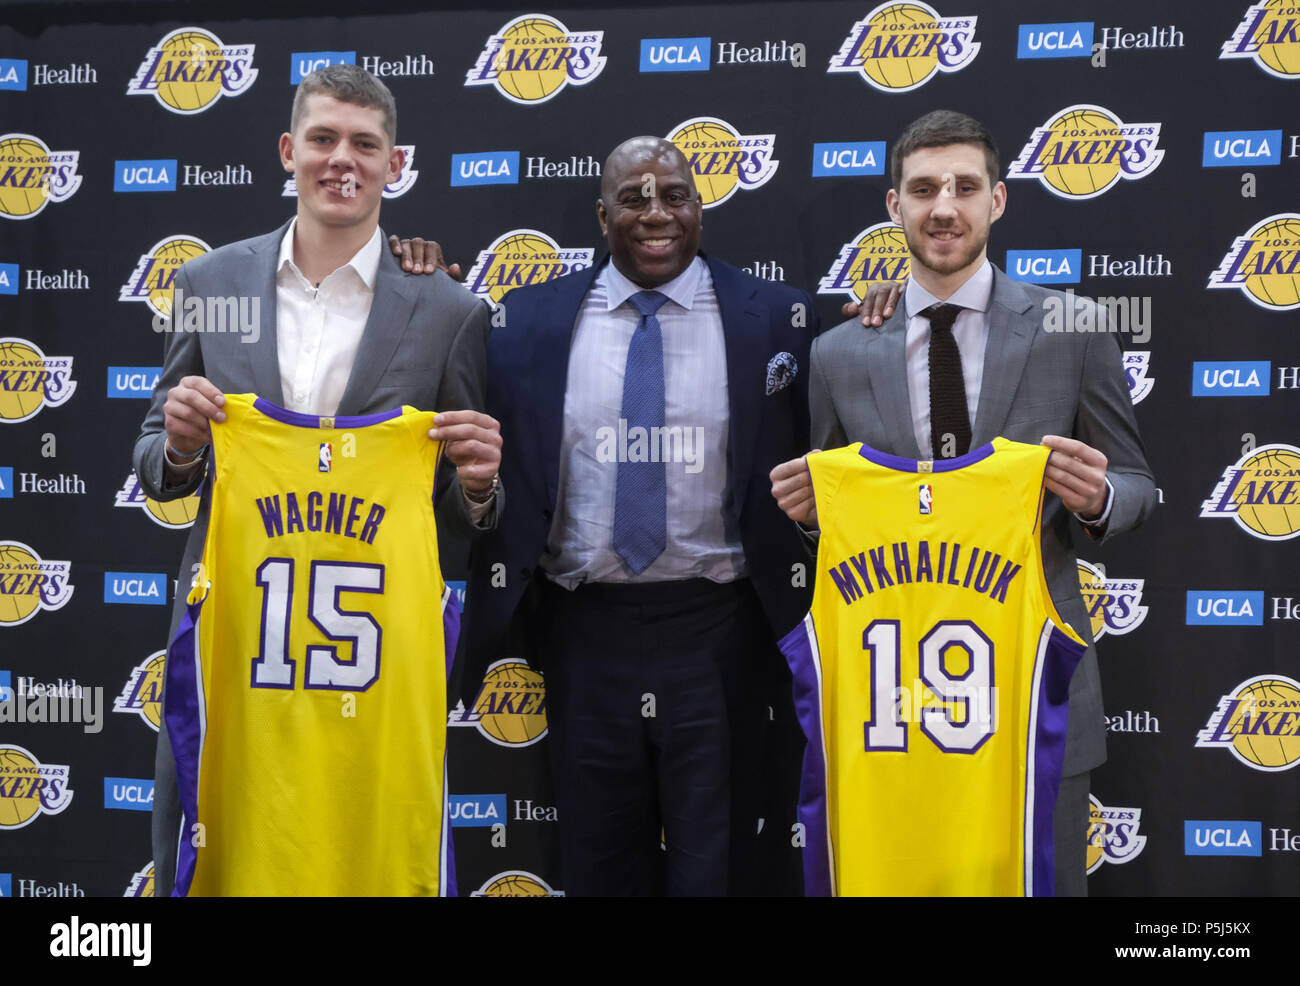 Los Angeles, California, USA. 26th June, 2018. Los Angeles Lakers president of basketball operations, Earvin ''Magic'' Johnson, center, rookies Sviatoslav Mykhailiuk, right, and Moritz Wagner pose with their new jerseys at an introductory press conference in Los Angeles, Tuesday, June 26, 2018. The Lakers introduce two new draft players, Moritz Wagner, originally from Germany, the 25th pick in the 2018 NBA Draft and guard Sviatoslav Mykhailiuk, originally from Ukraine. Credit: Ringo Chiu/ZUMA Wire/Alamy Live News Stock Photo